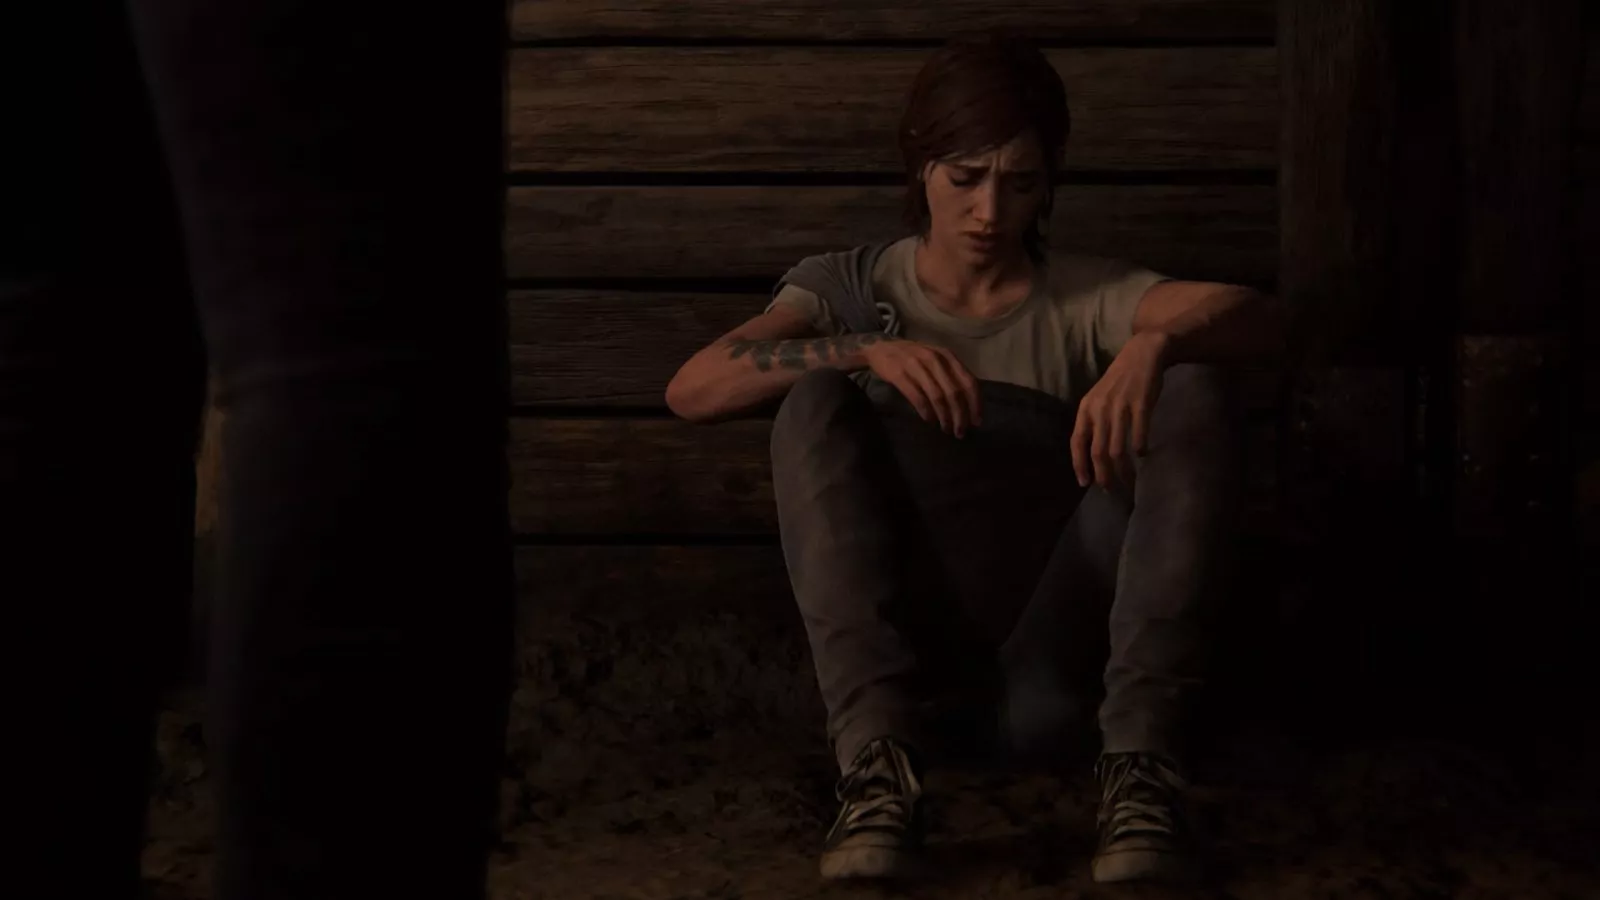 The Last of Us Part 2: Fan Discovers Abby Can Actually Kill Tommy